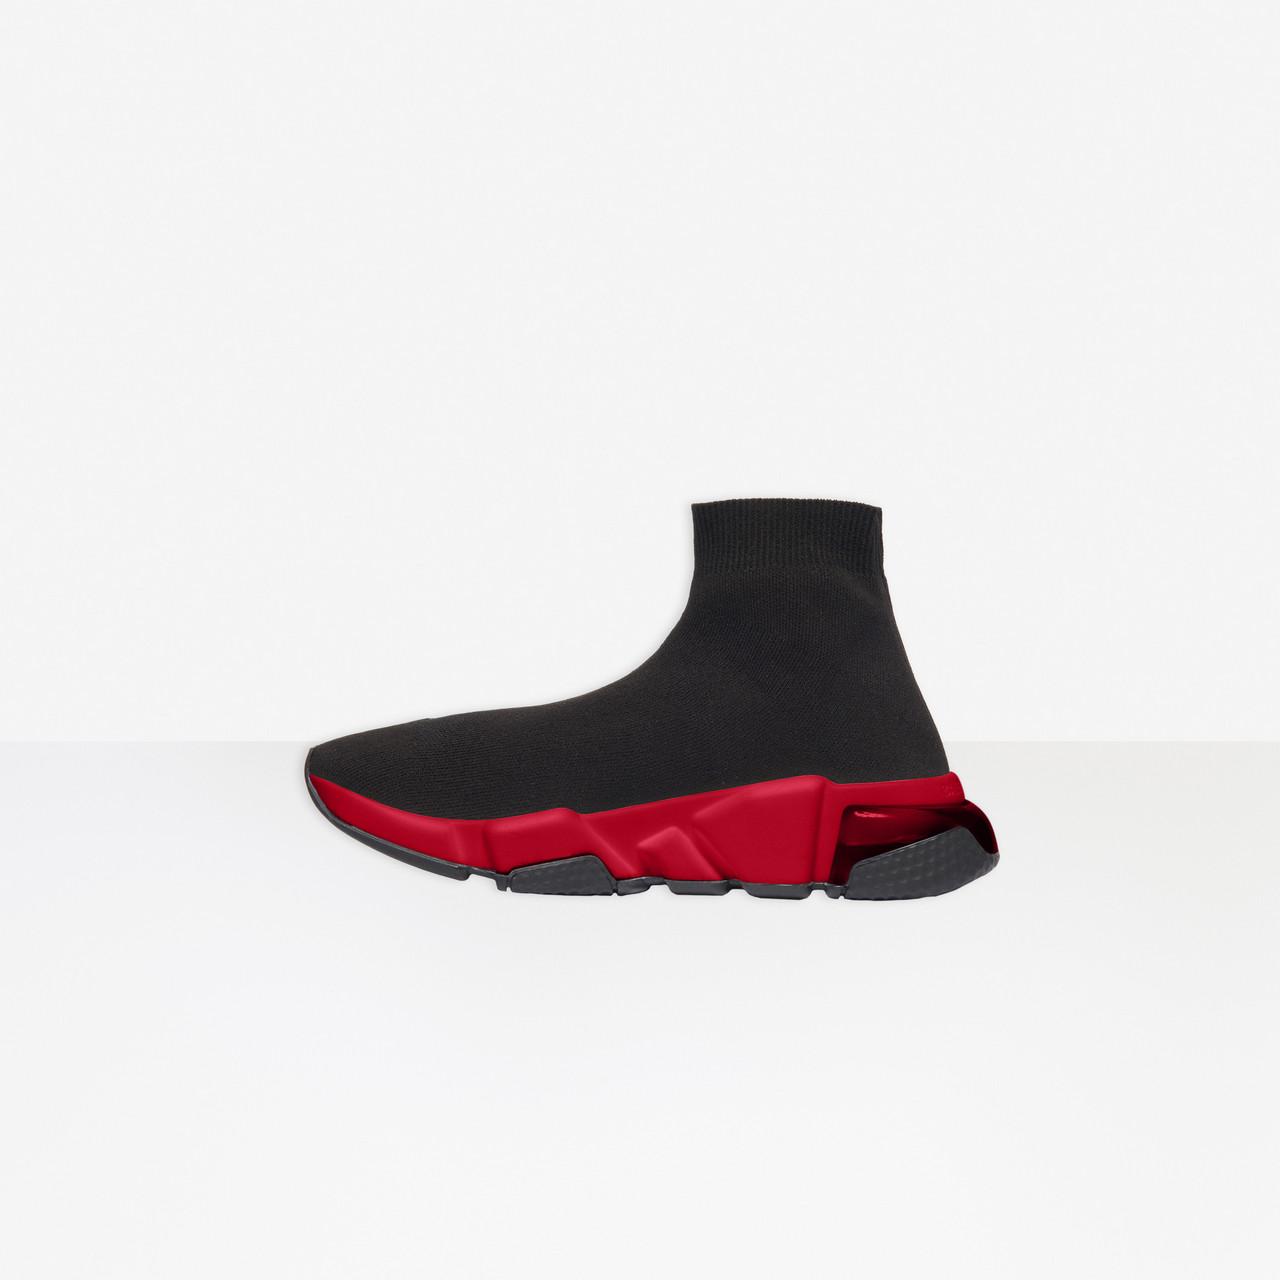 Balenciaga Speed Clear Sole Sneaker in Black/Red (Red) for Men - Lyst